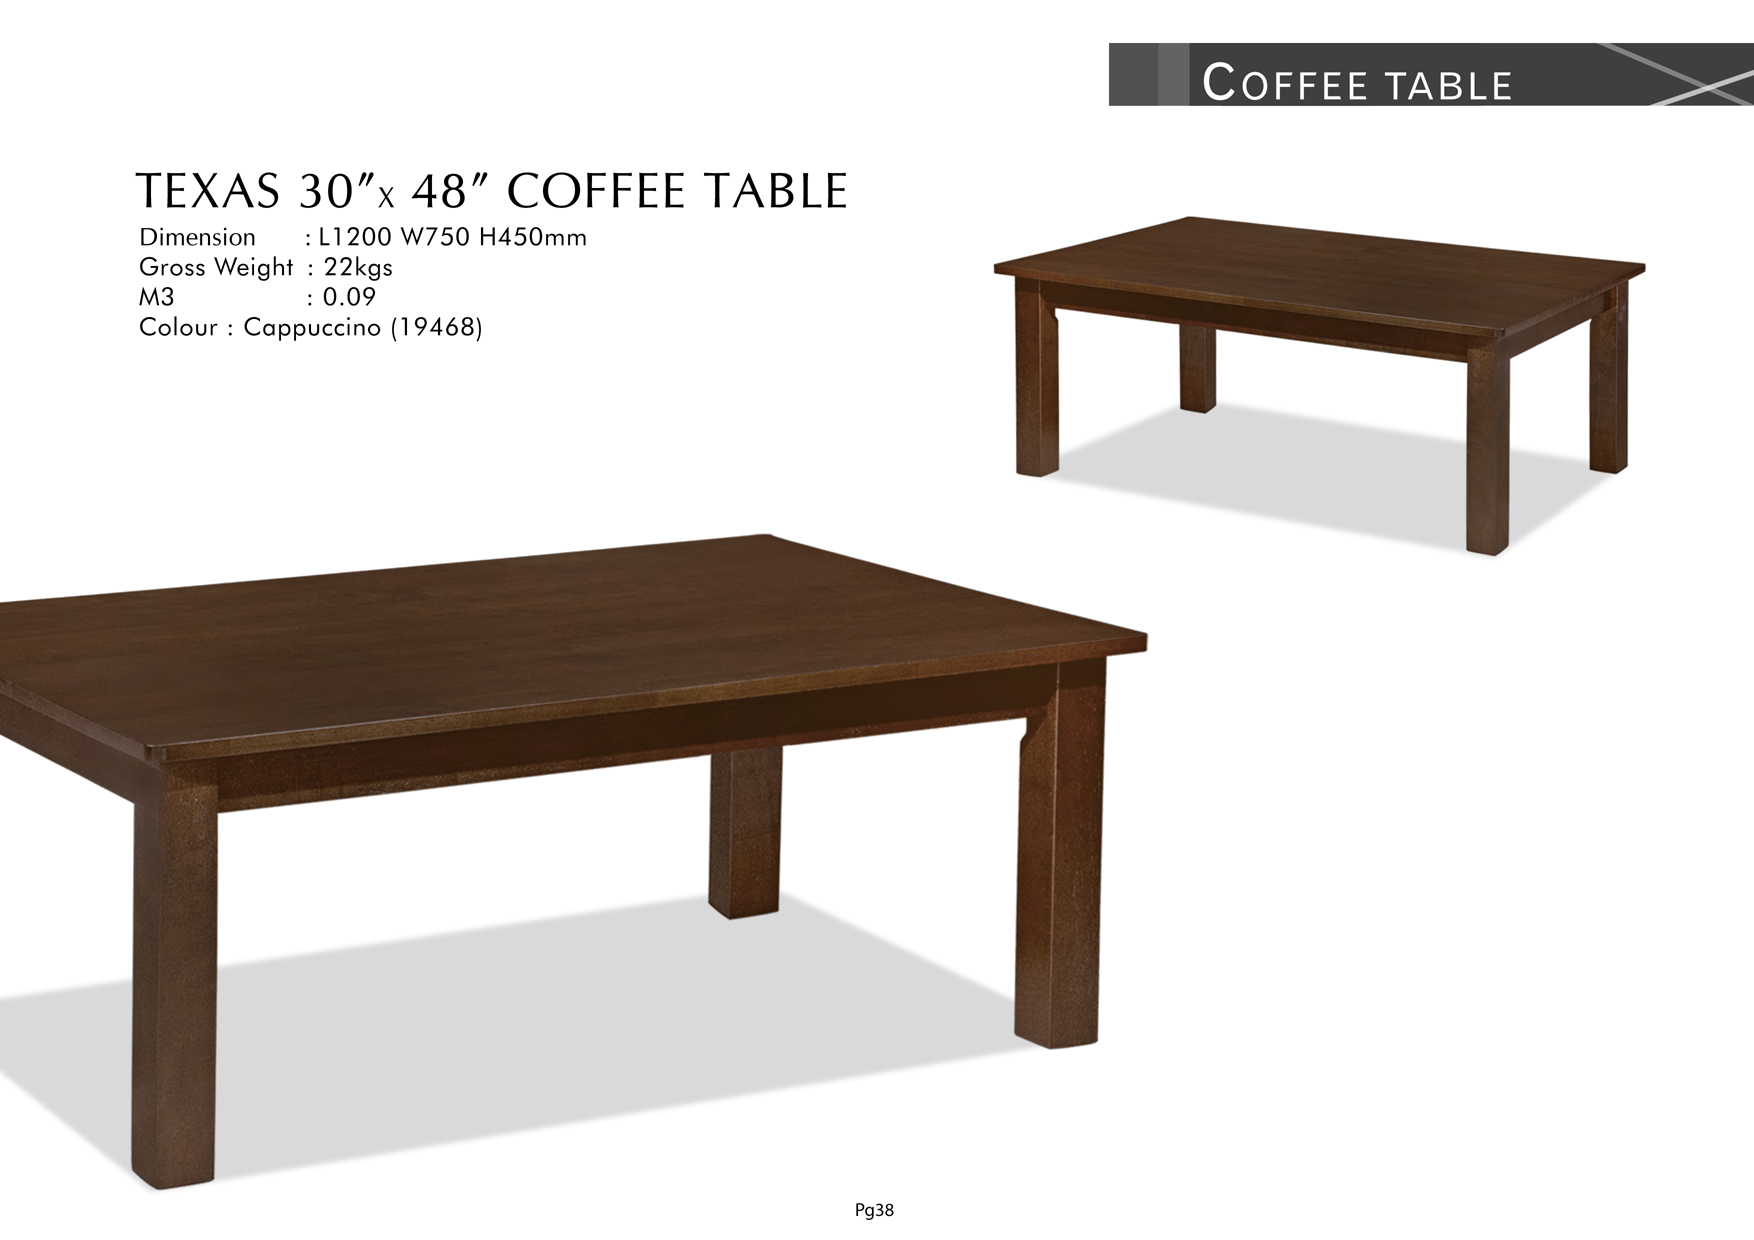 Product: PG38. TEXAS COFFEE TABLE